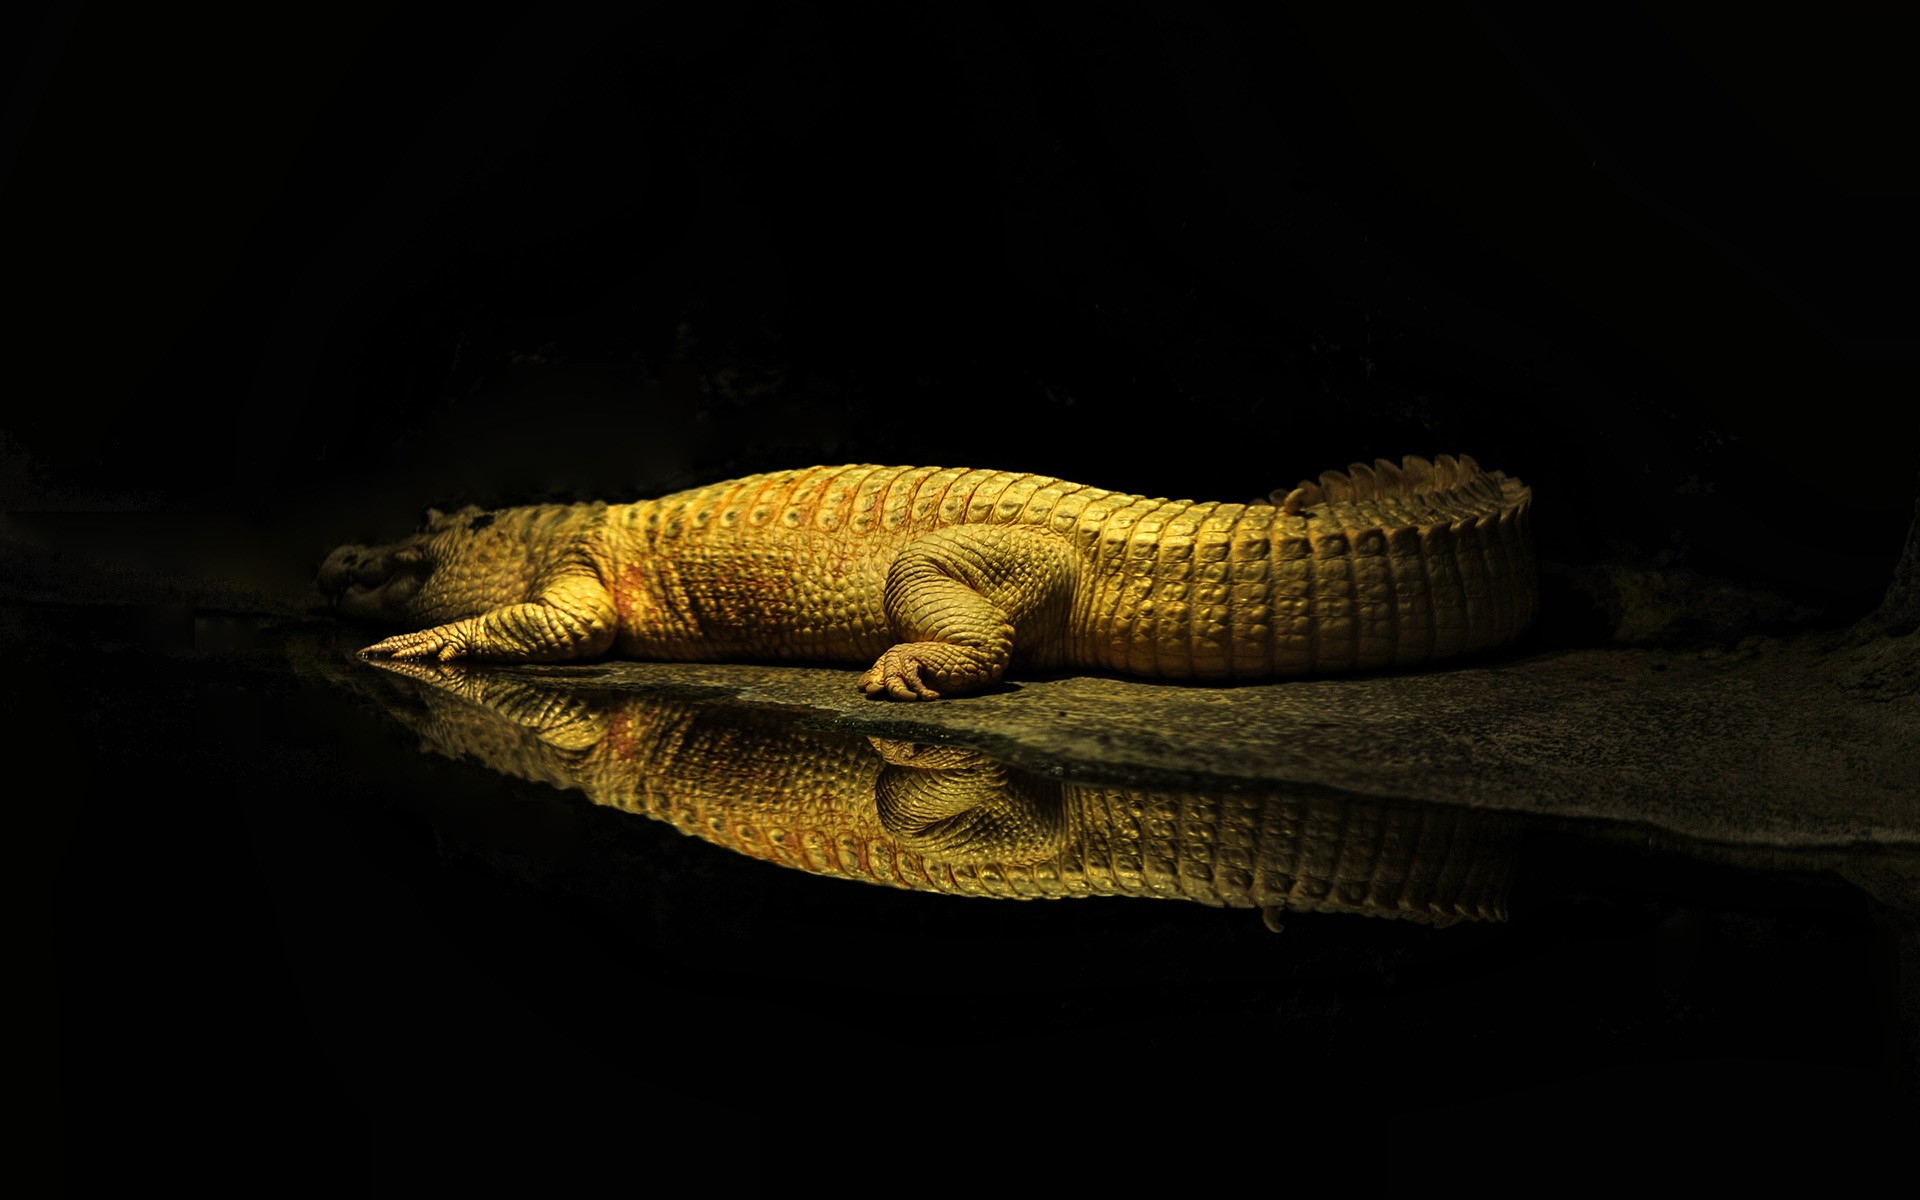 General 1920x1200 crocodiles yellow water reptiles animals wildlife rest reflection sun rays black background simple background